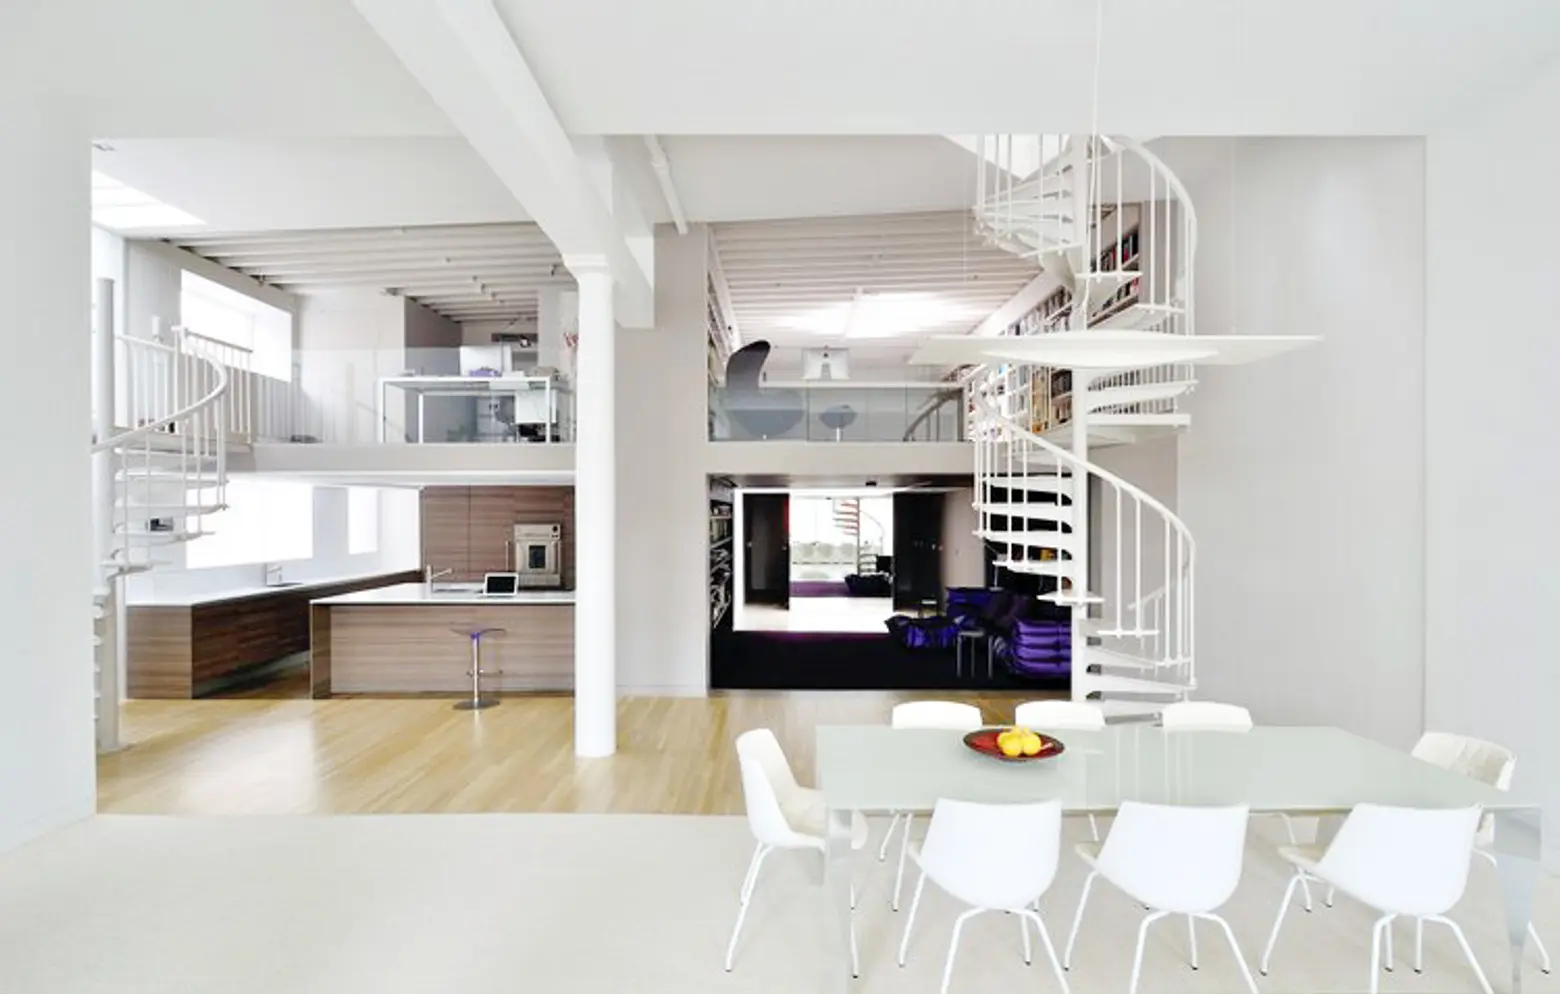 An Endless Spiral Staircase Ties This Spacious David Hotson-Designed Soho Loft Together